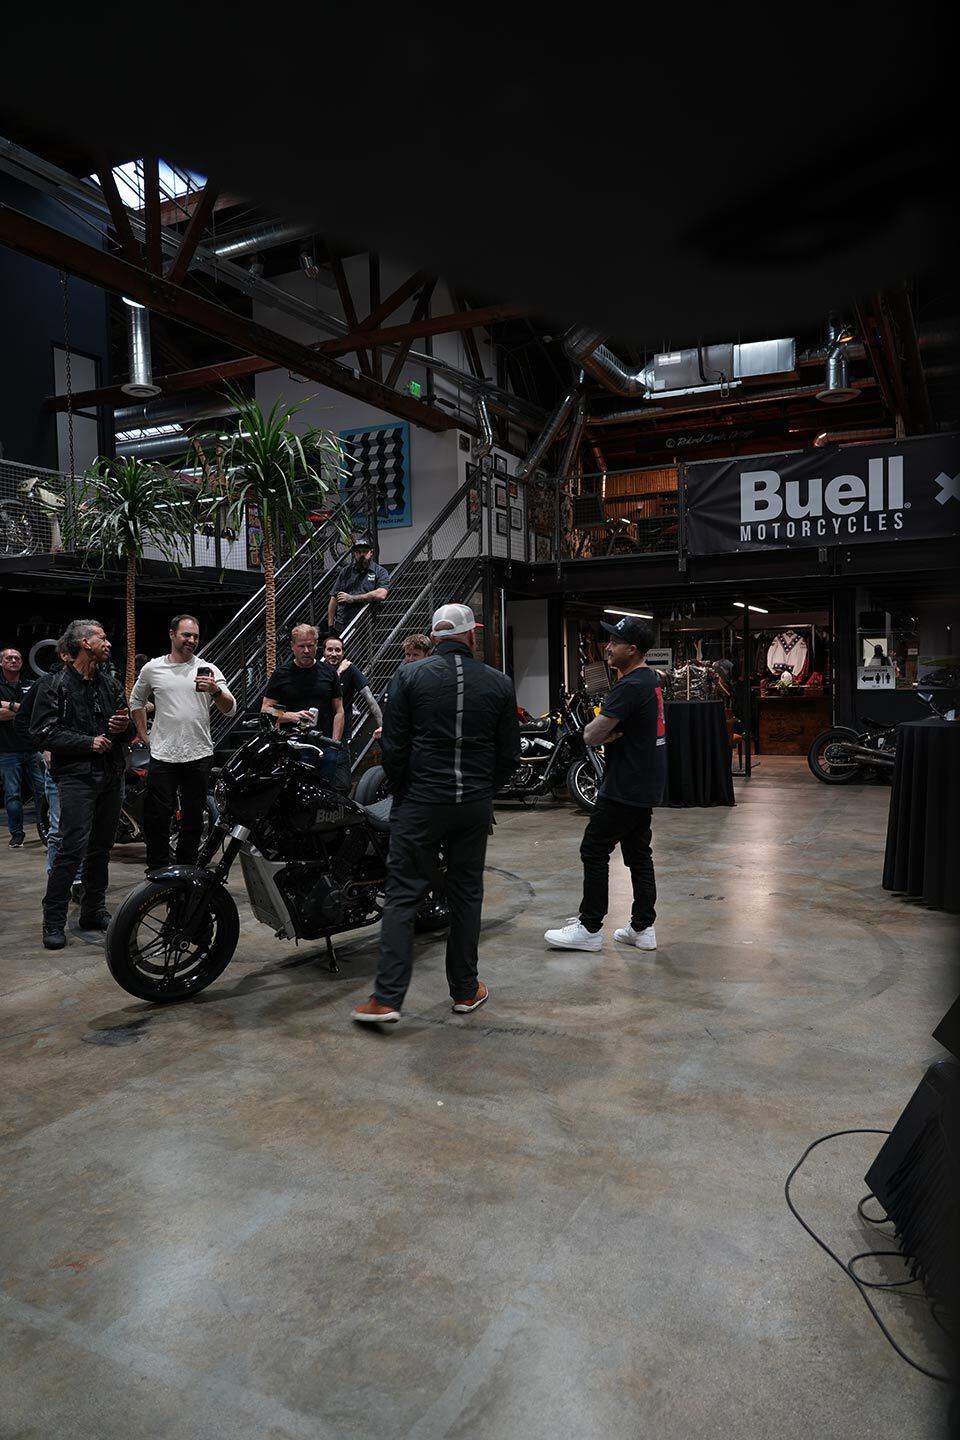 Roland Sands (right) shares the rundown on Buell’s Super Cruiser to classic members of the motorcycle media.